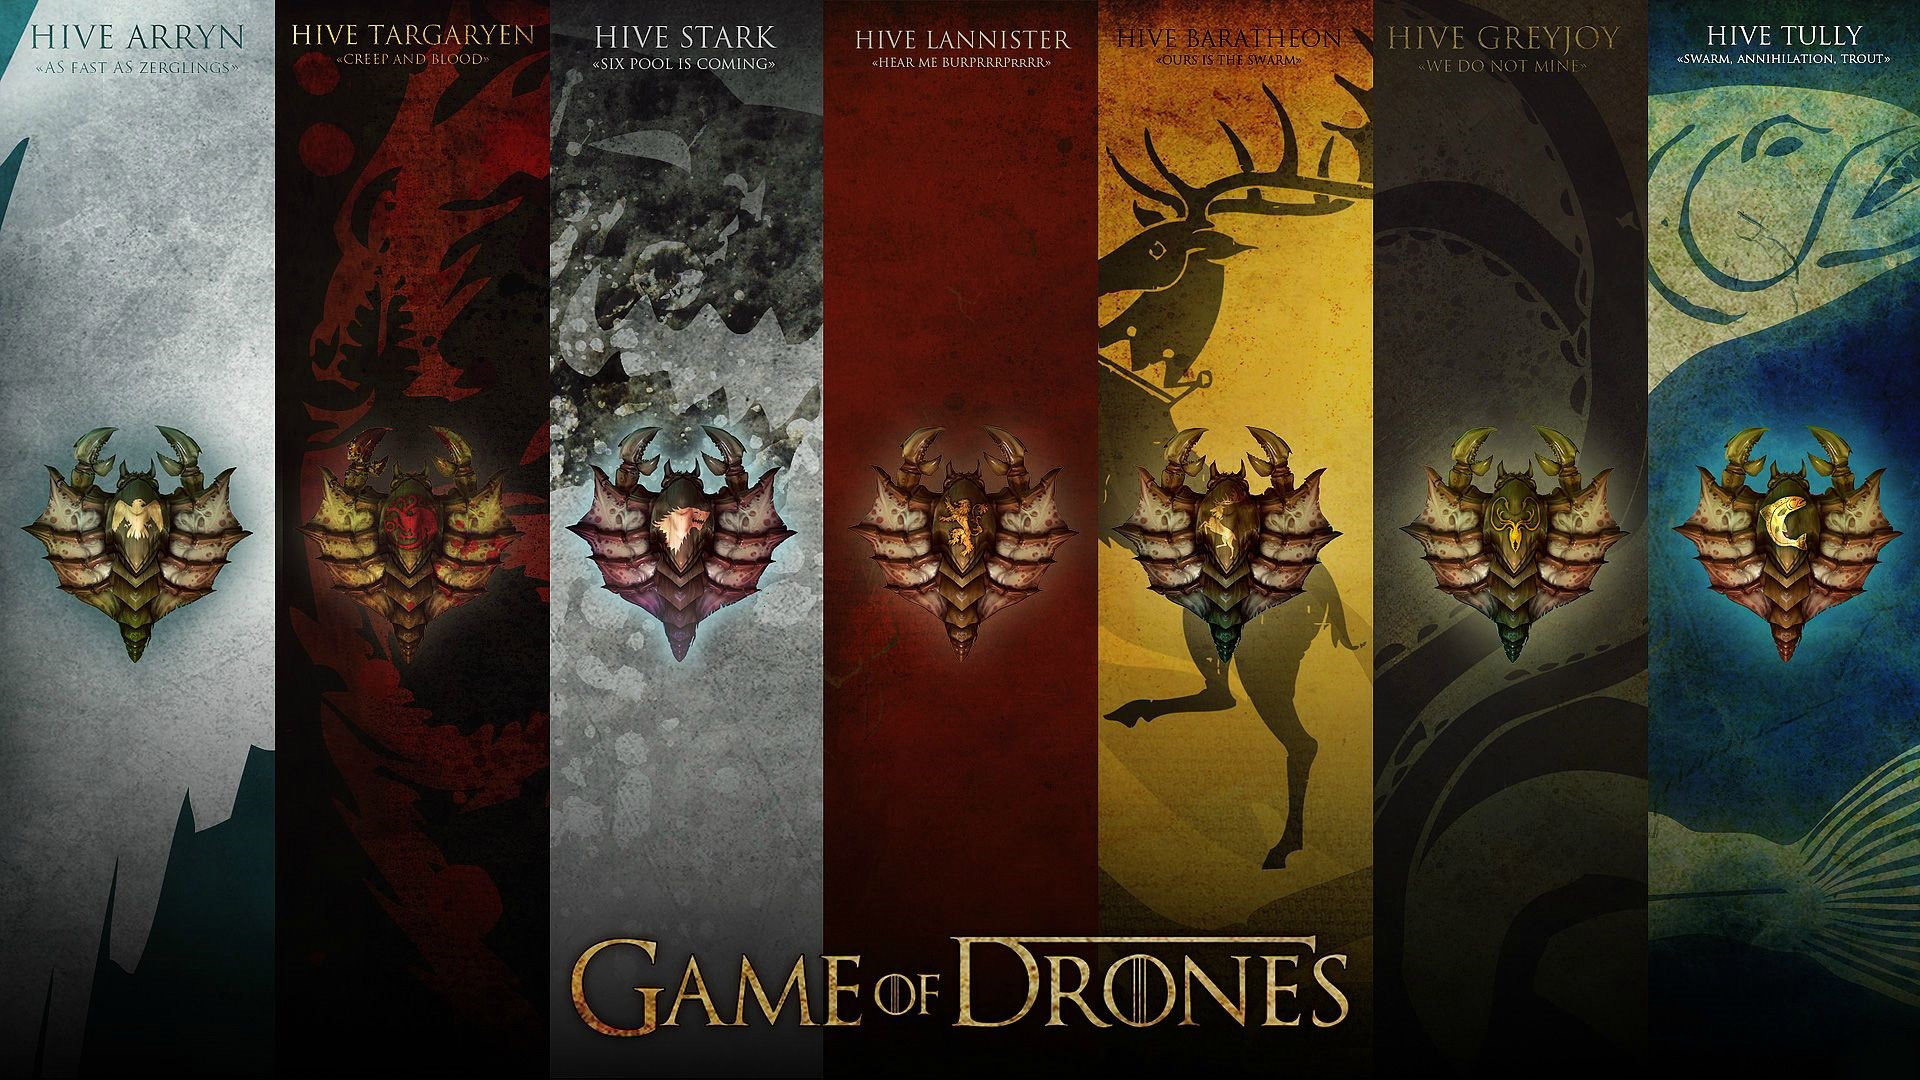 Game of Drones HD Wallpaper | Game Of Thrones Wallpapers